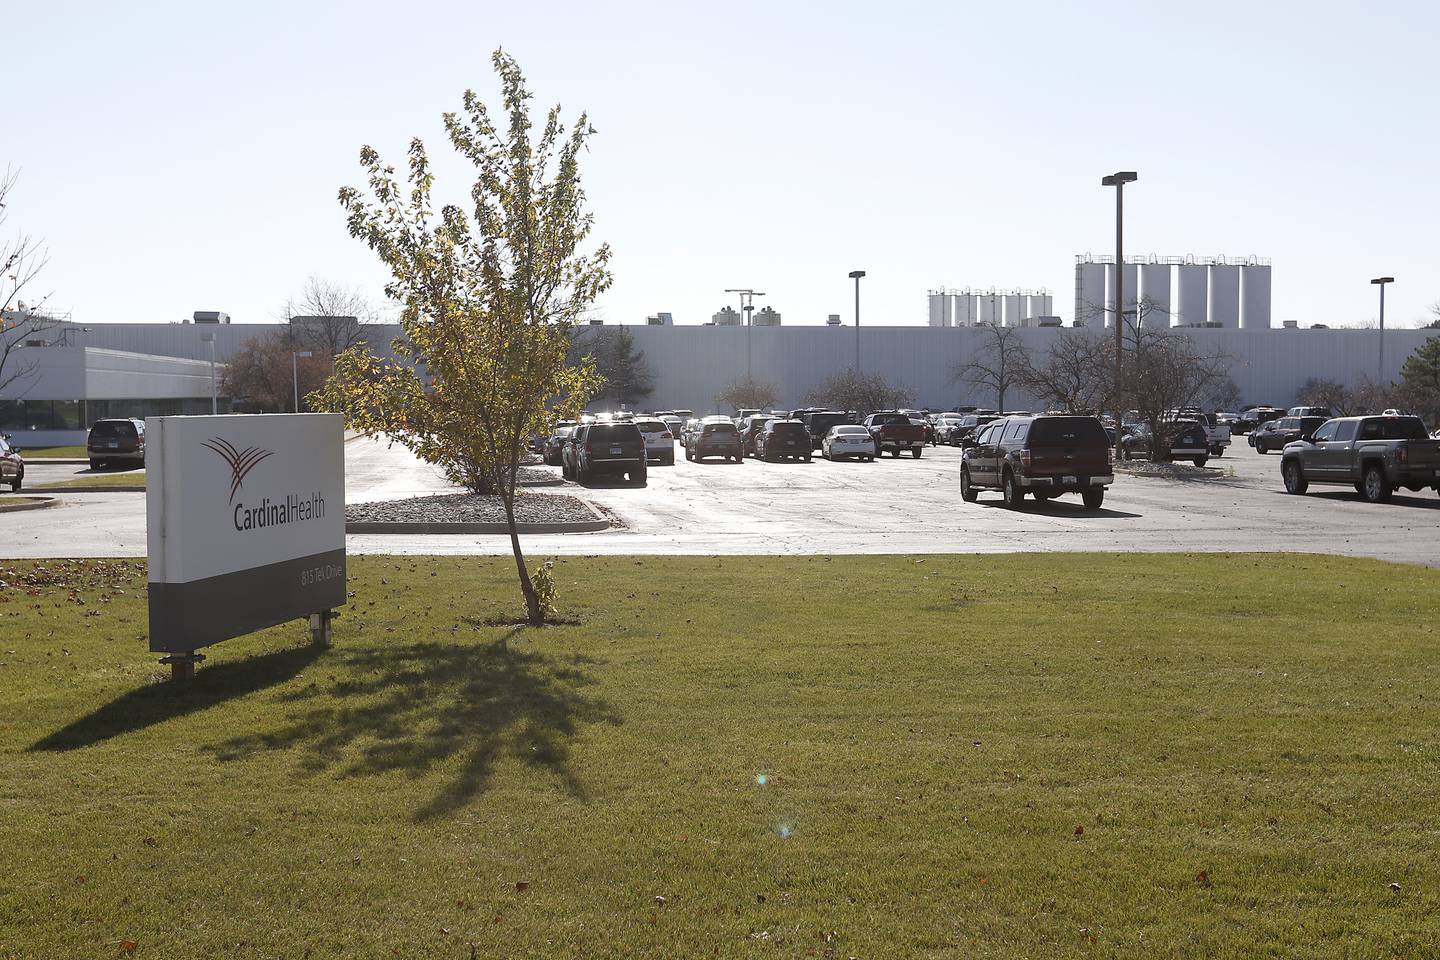 Cardinal Health on Tuesday Nov. 1, 2022. The company filed a Worker Adjustment and Retraining Notification, or WARN, Act notice that it planed to lay off 236 people at the facility at 815 Tek Drive in Crystal Lake starting Dec. 31, but city officials said a lease with a new company should save those jobs.